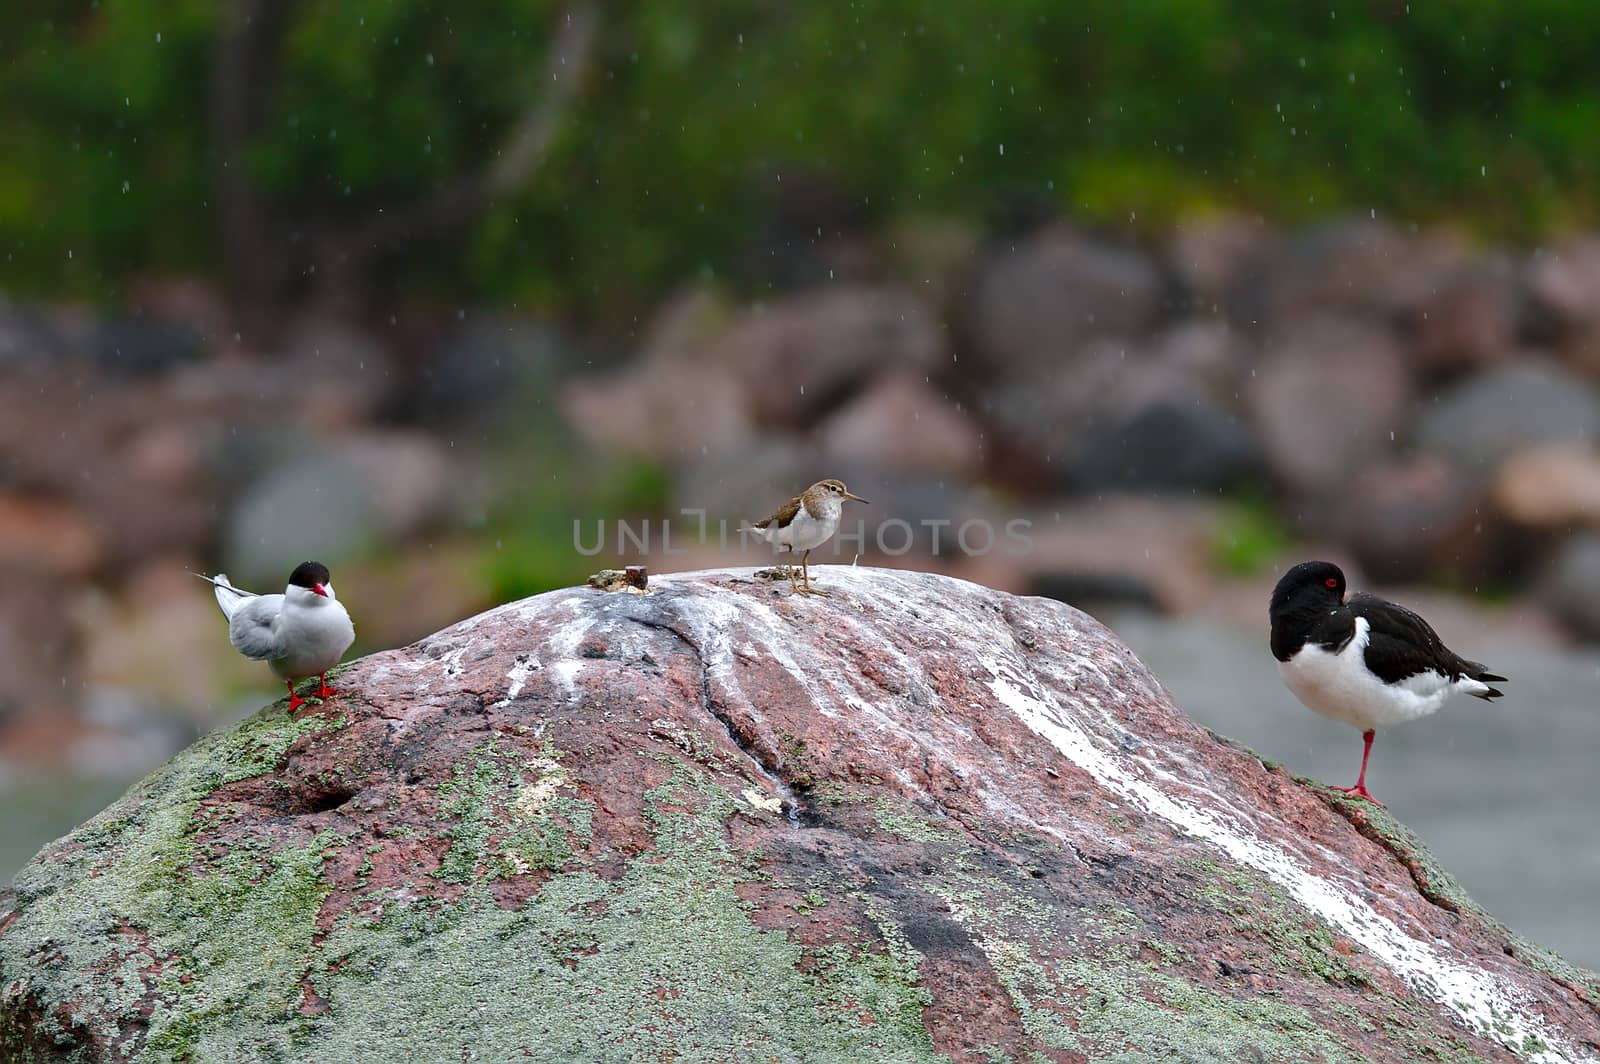 Three different birds spending time together on a same rock